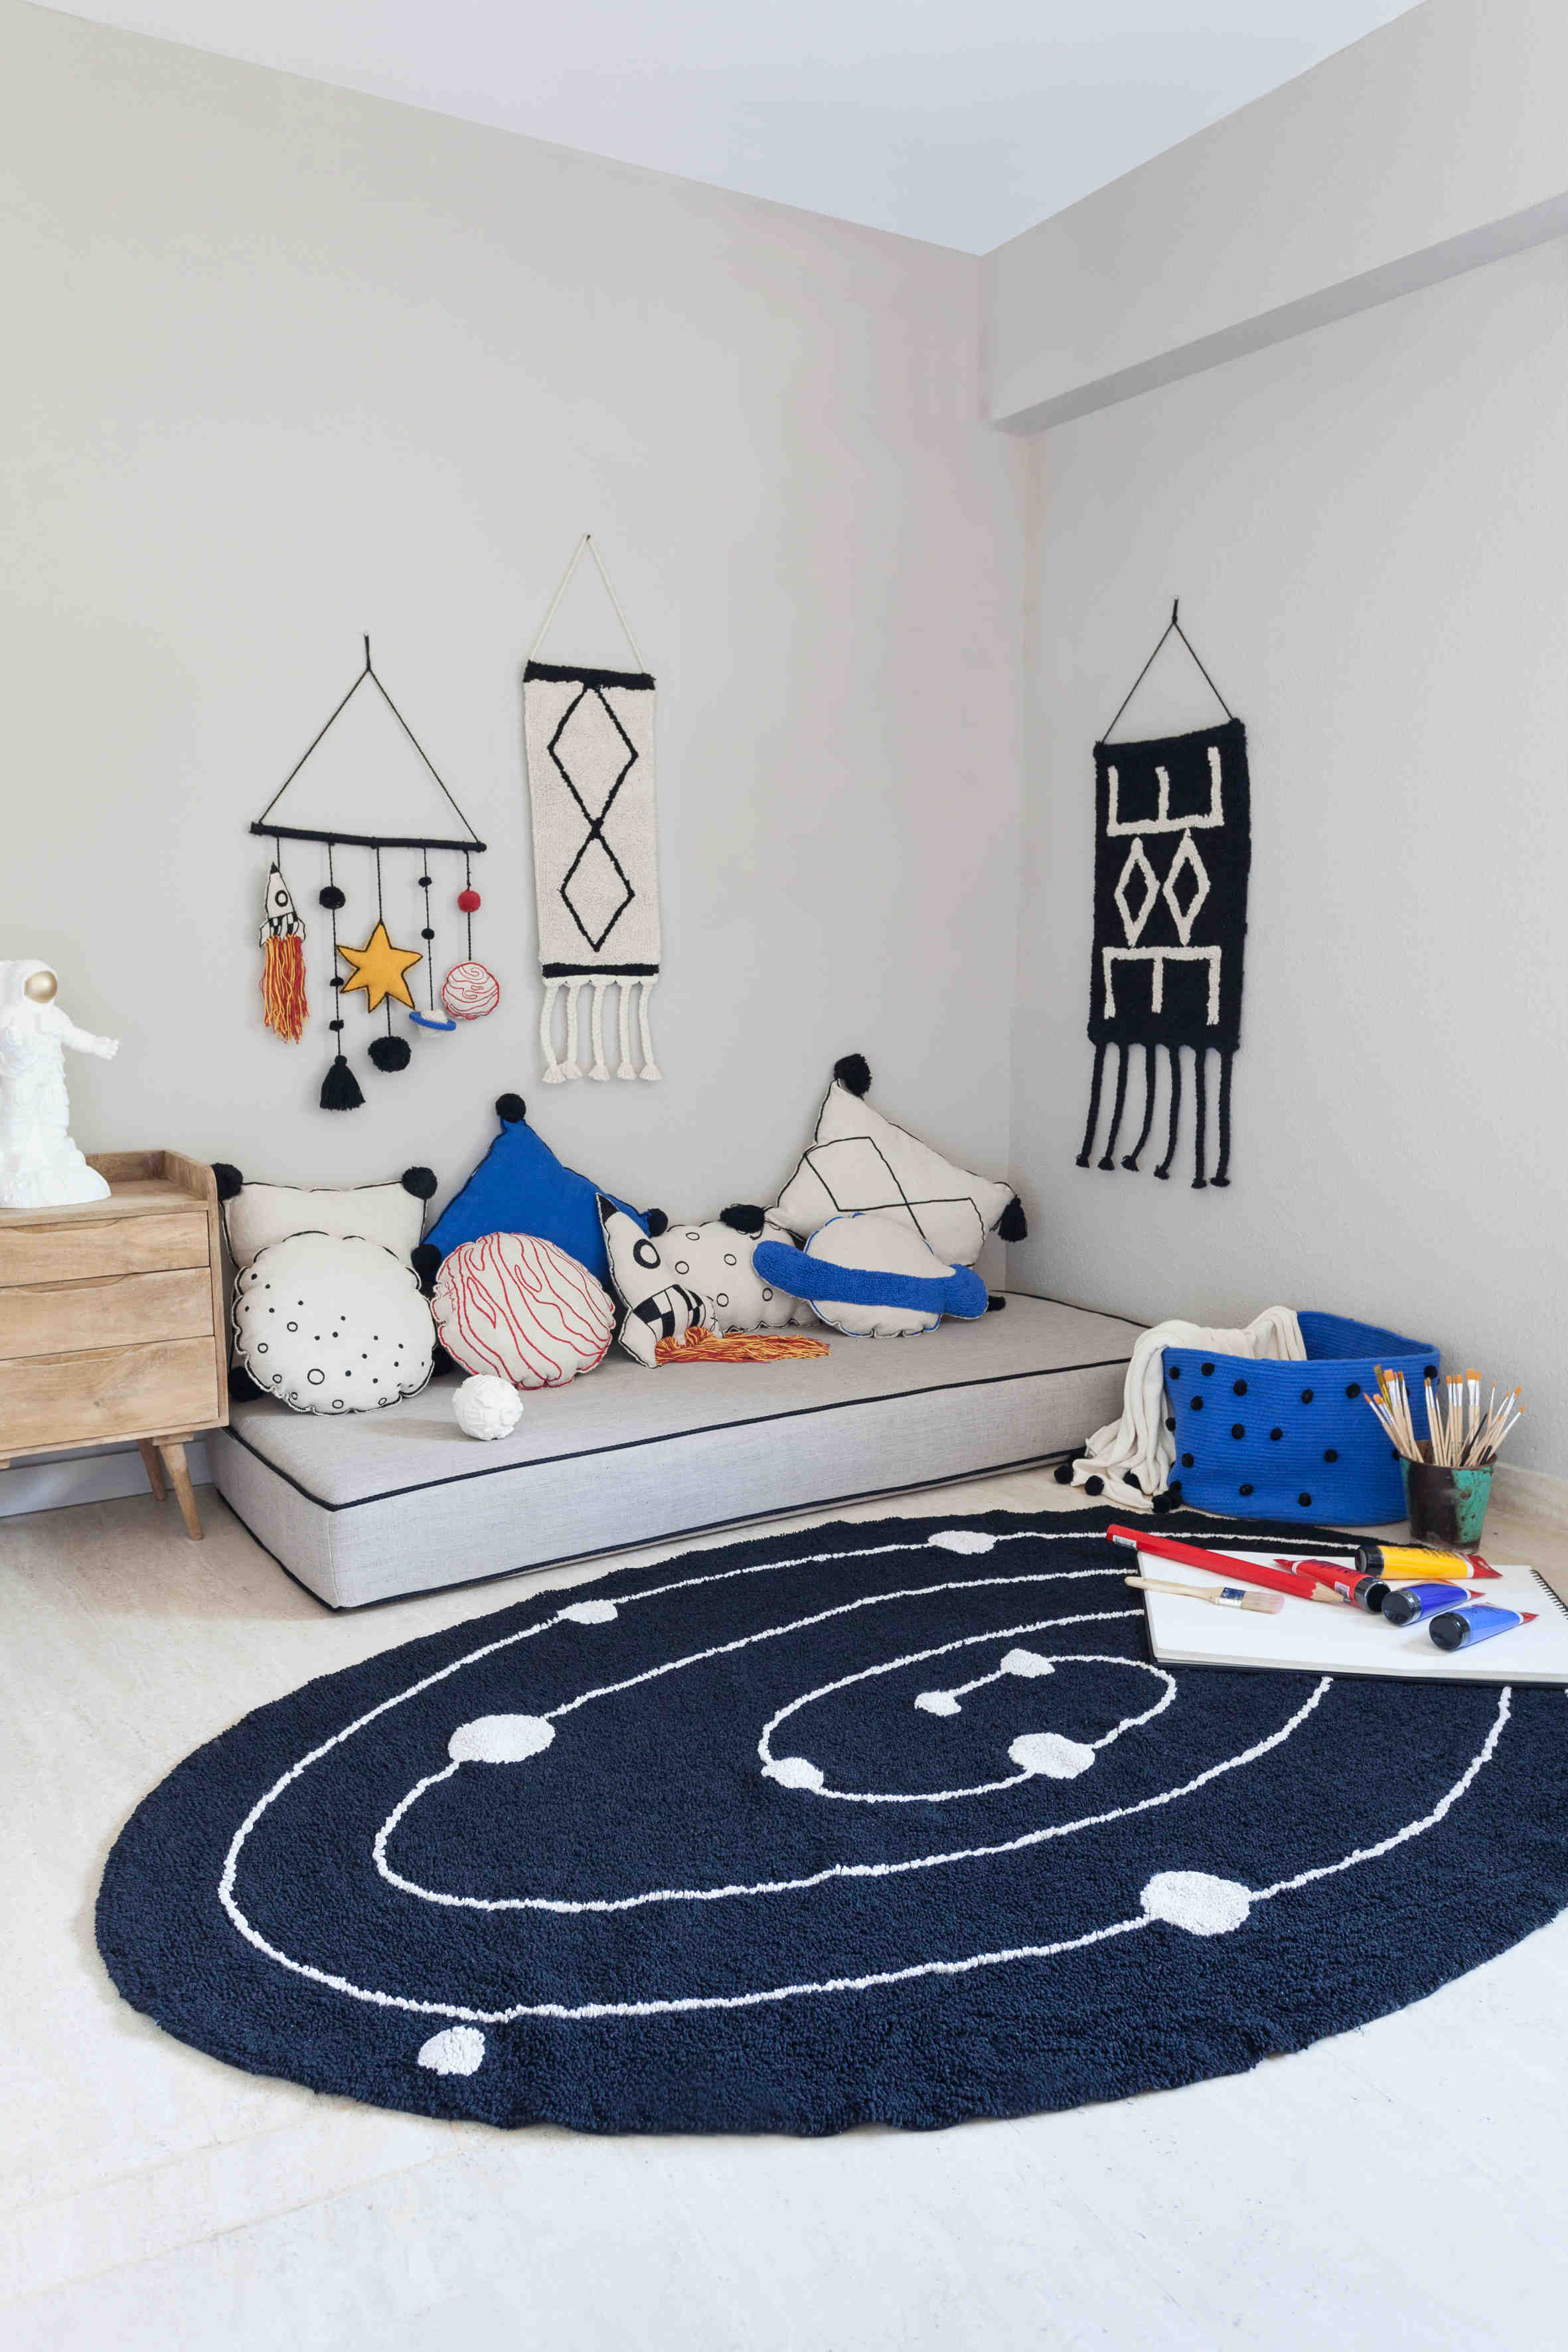 Oval-shaped black cotton rug decorated with an abstract circular design and white circles.